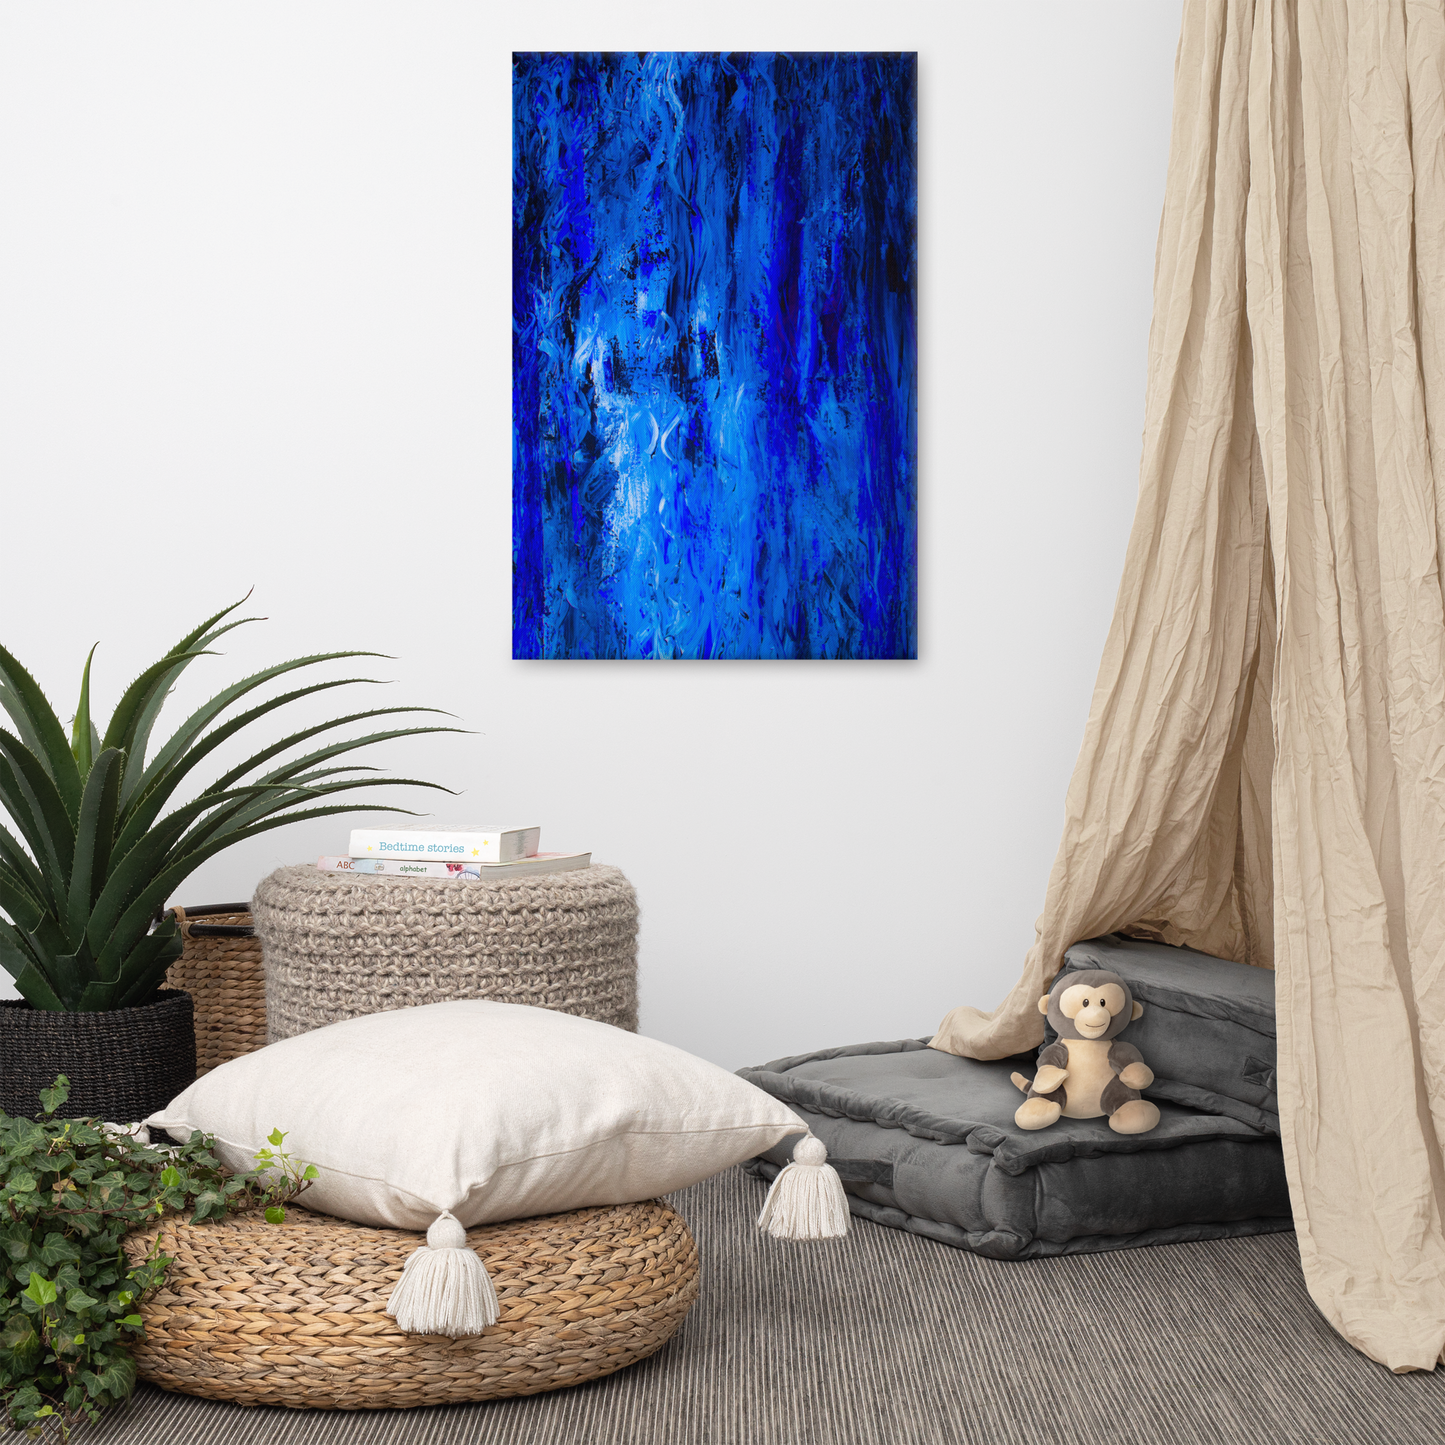 NightOwl Studio Abstract Wall Art, Blue Woods, Boho Living Room, Bedroom, Office, and Home Decor, Premium Canvas with Wooden Frame, Acrylic Painting Reproduction, 24” x 36”